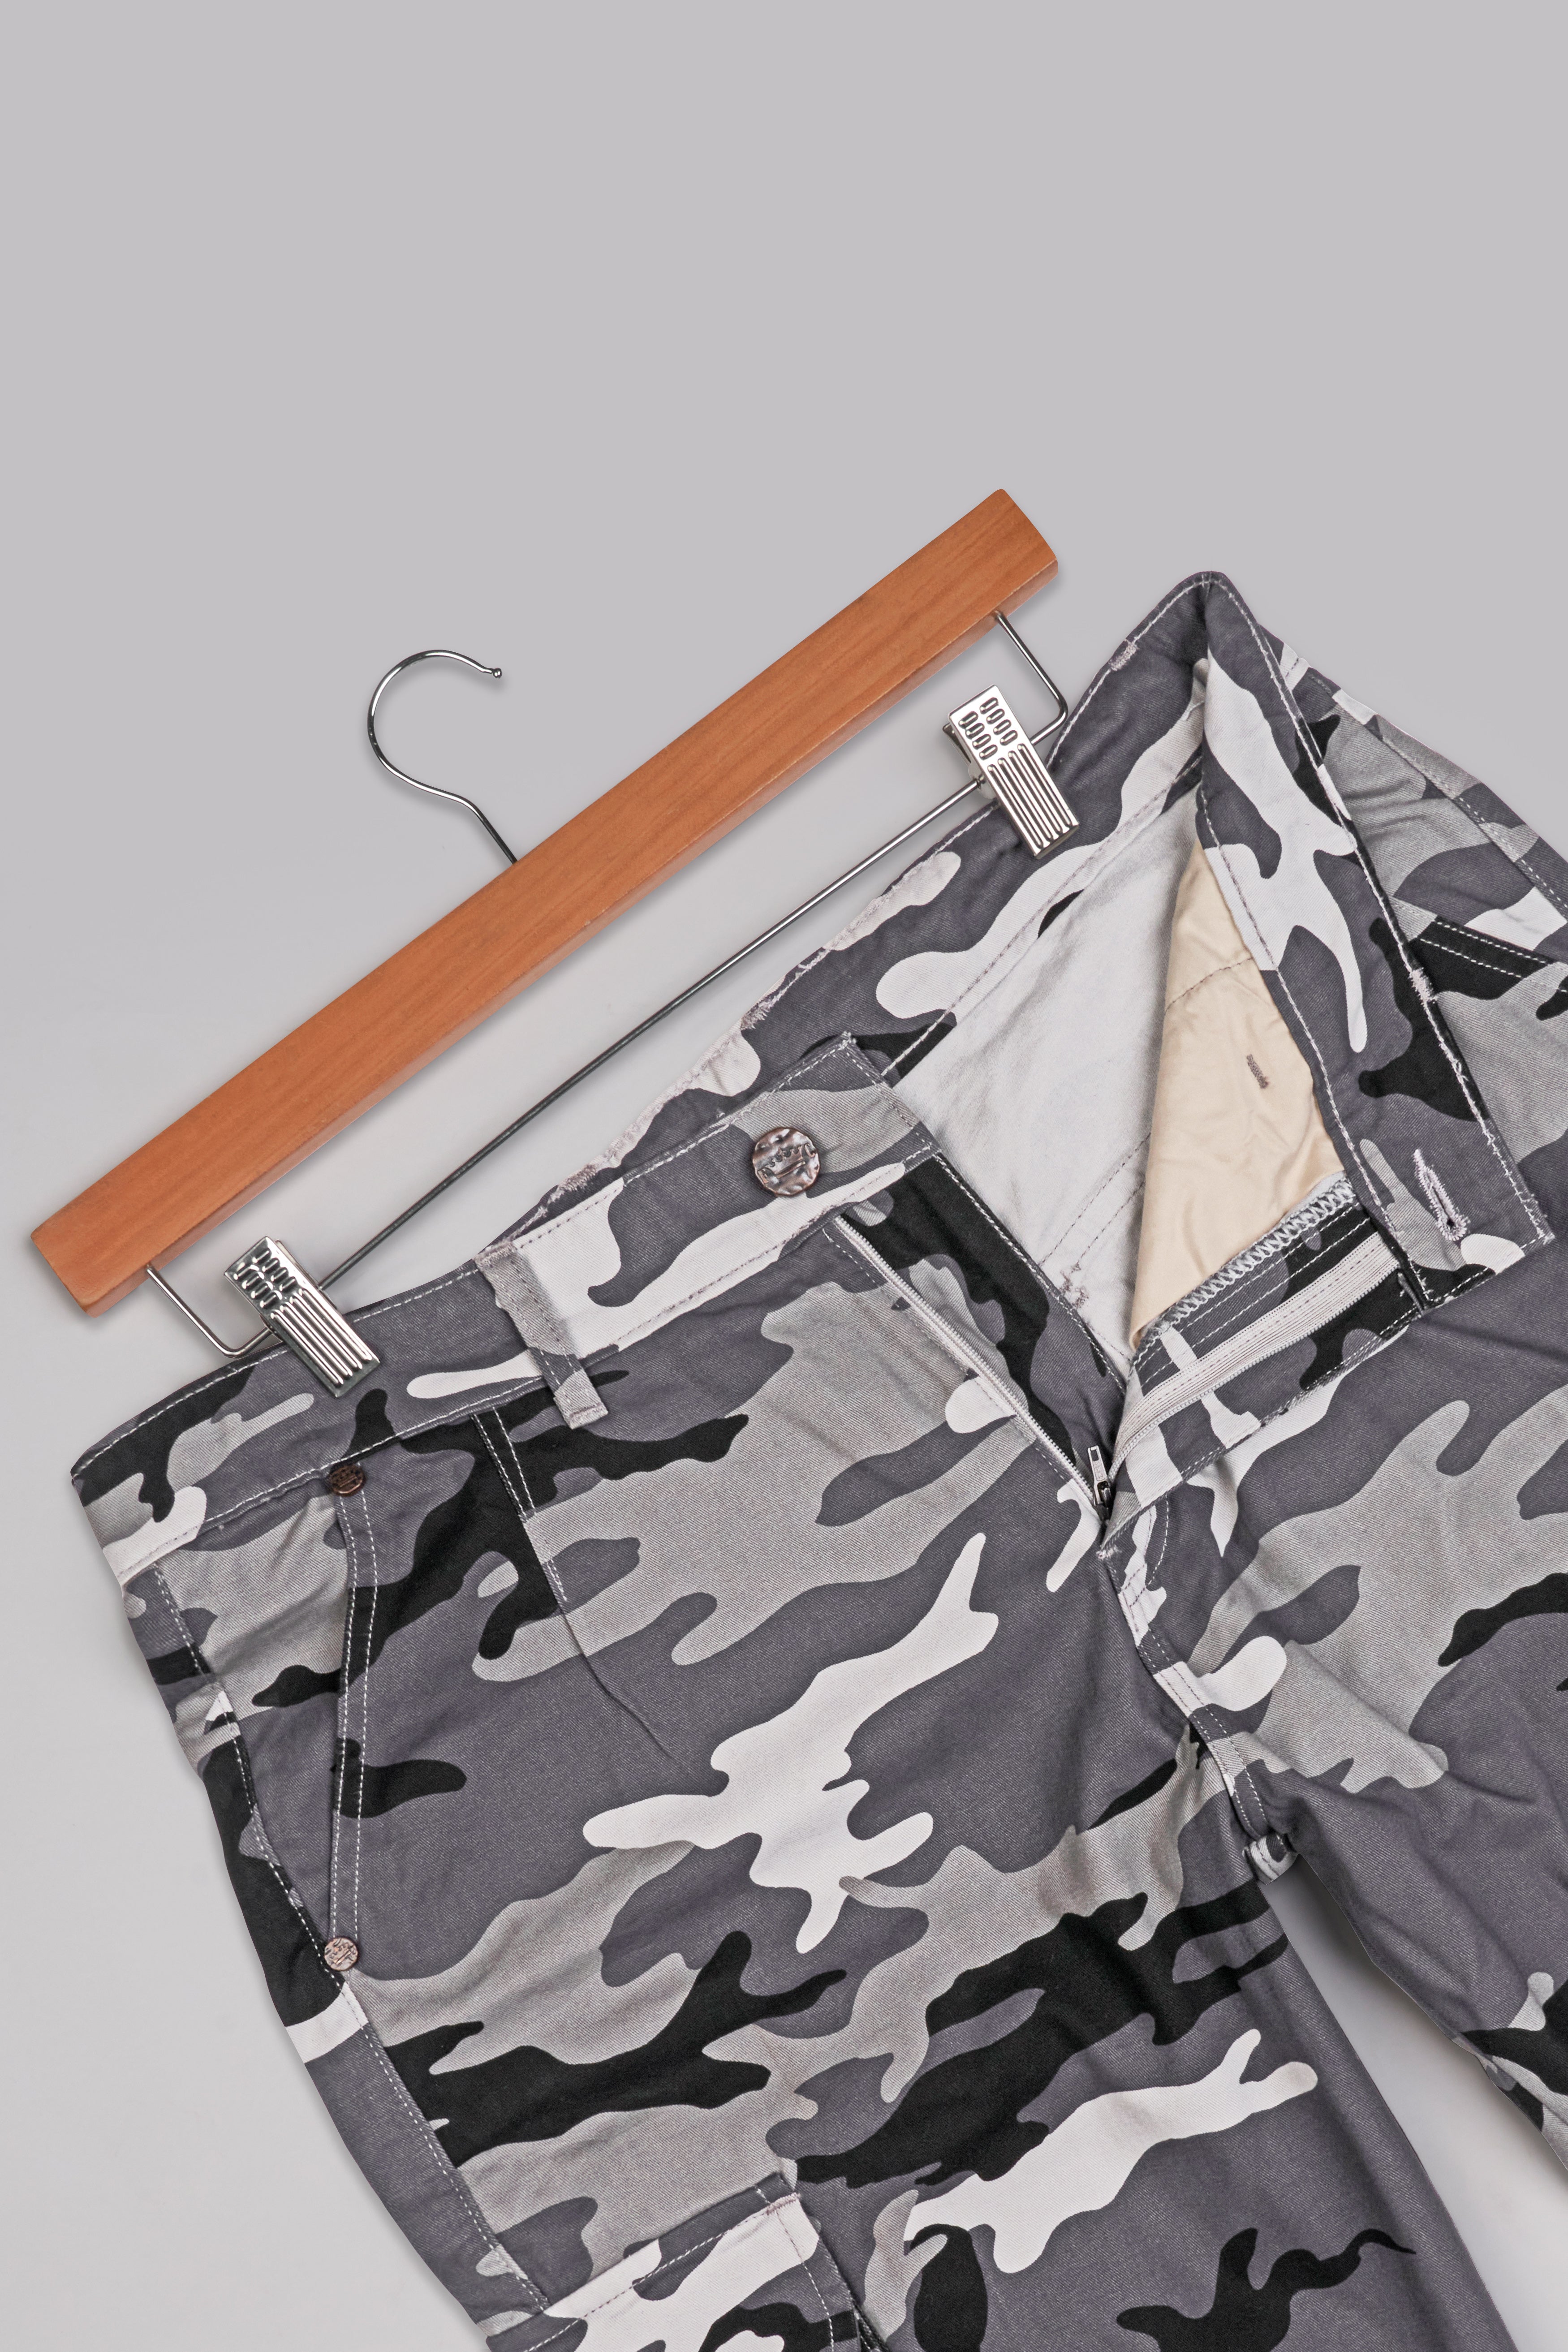 Porcelain White with Fuscous Gray and Black Camouflage Cargo Shorts SR276-28, SR276-30, SR276-32, SR276-34, SR276-36, SR276-38, SR276-40, SR276-42, SR276-44